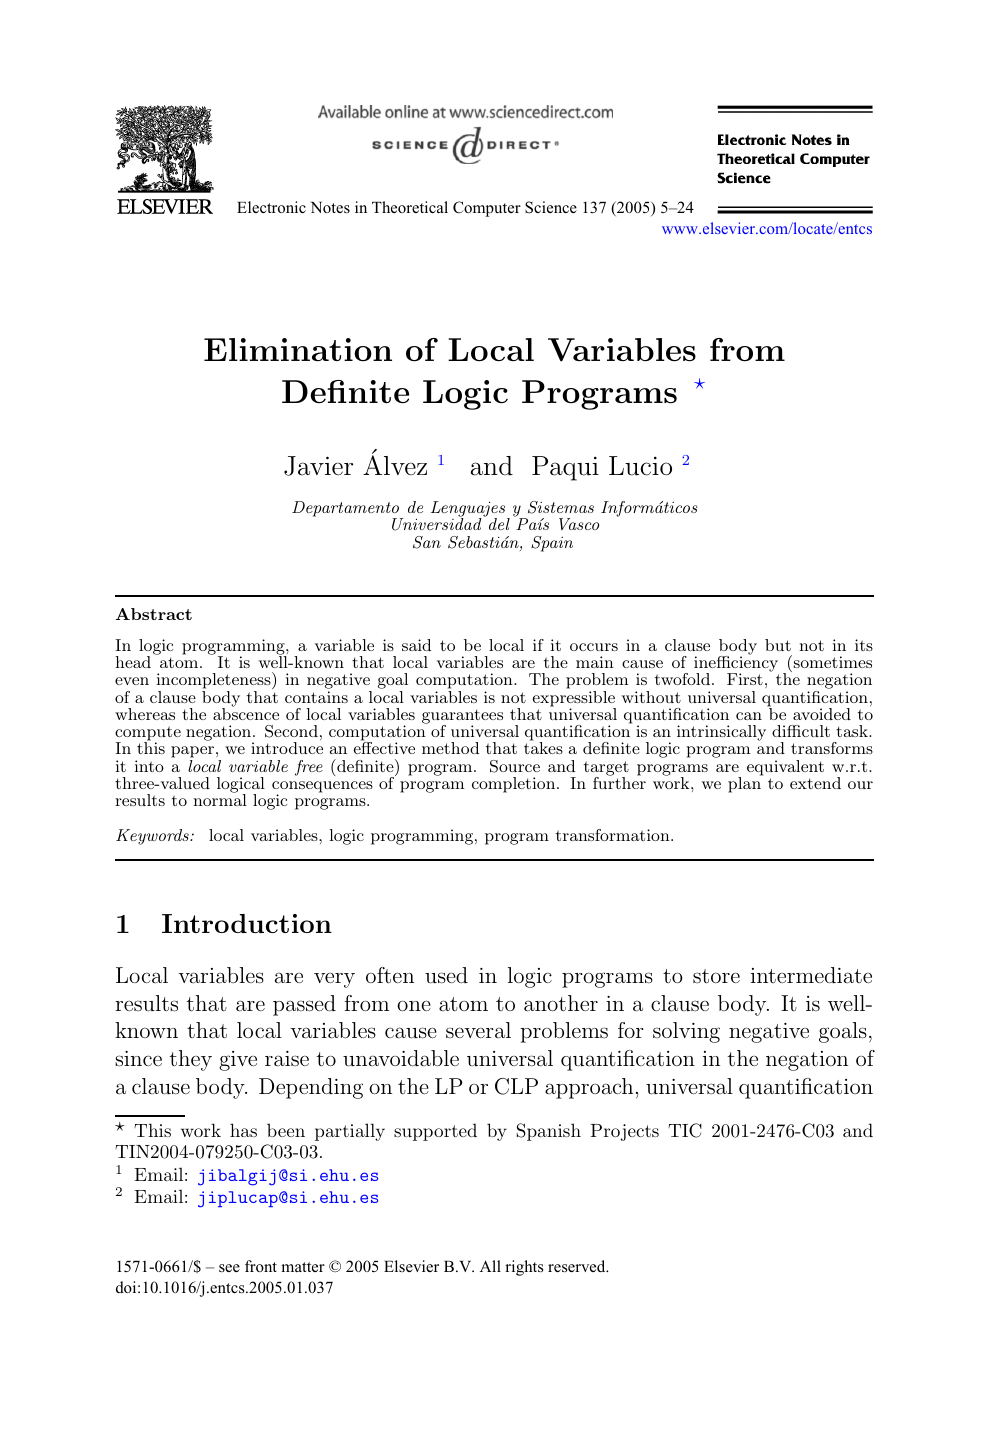 Elimination Of Local Variables From Definite Logic Programs Topic Of Research Paper In Computer And Information Sciences Download Scholarly Article Pdf And Read For Free On Cyberleninka Open Science Hub